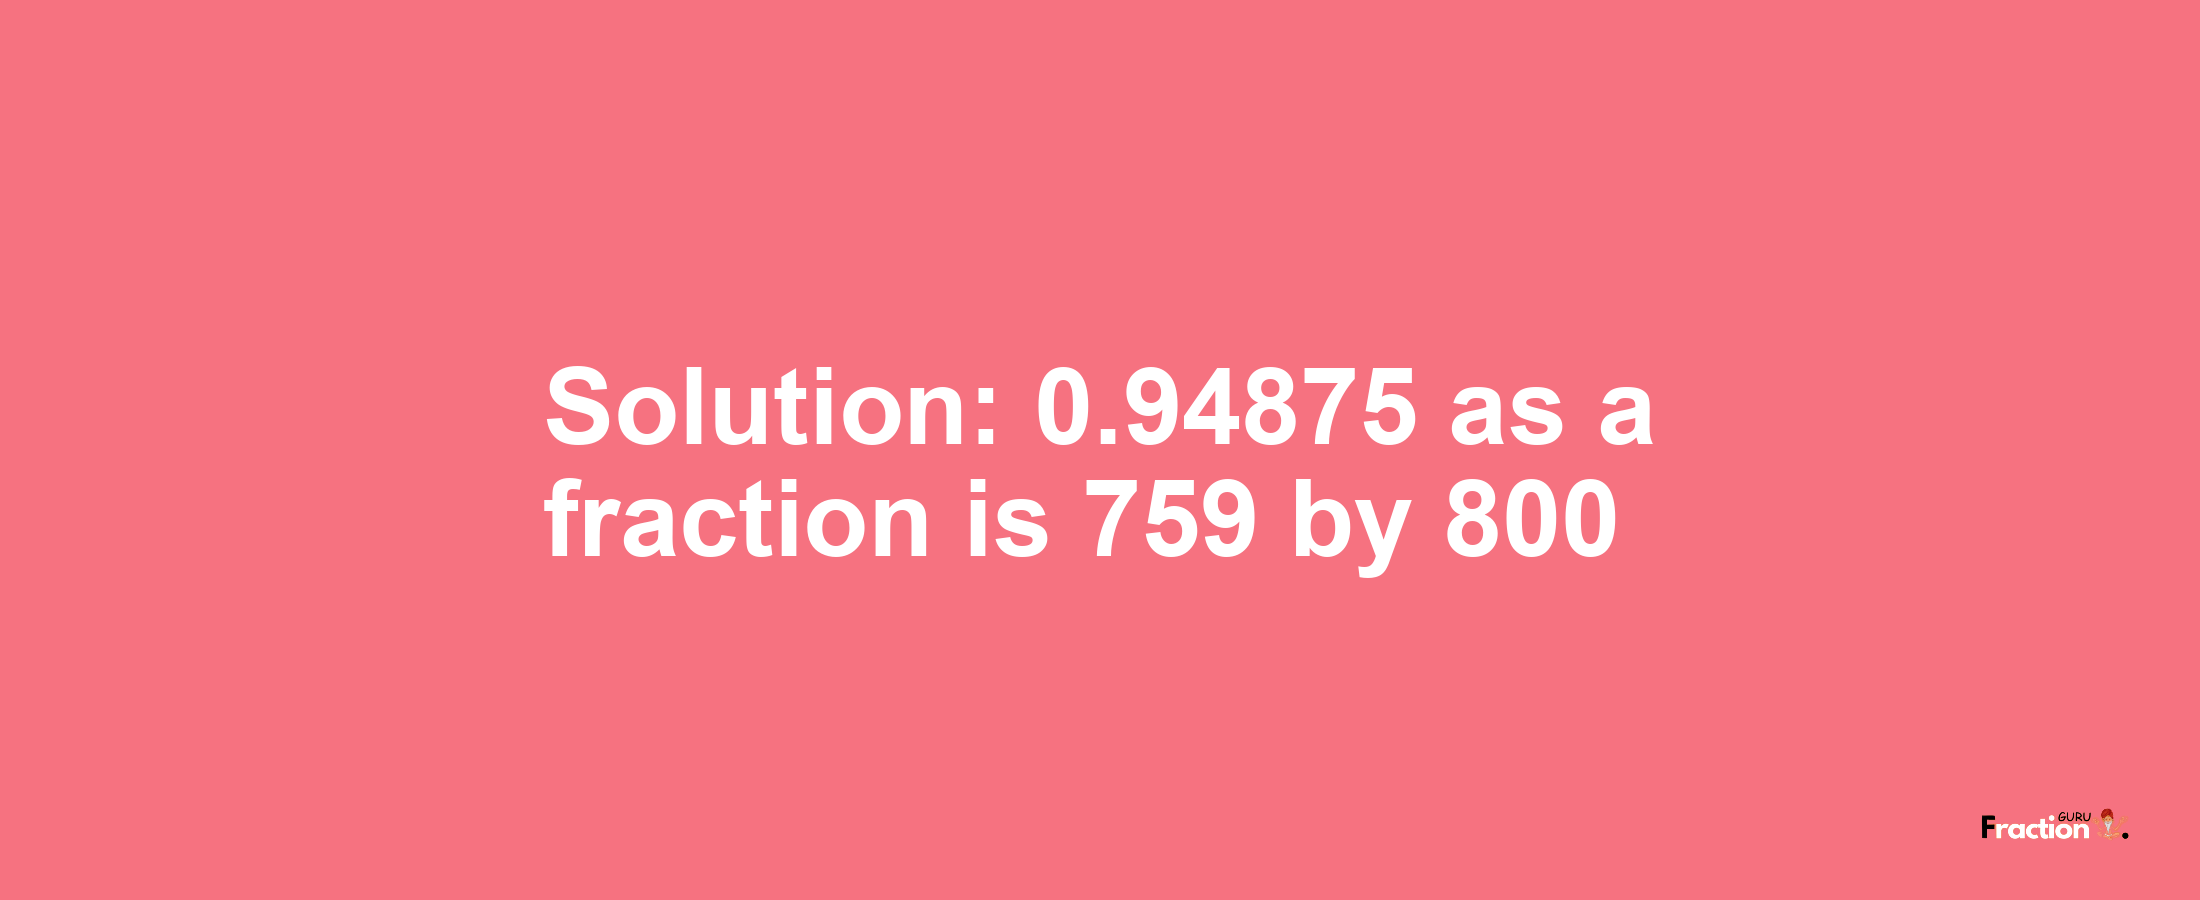 Solution:0.94875 as a fraction is 759/800